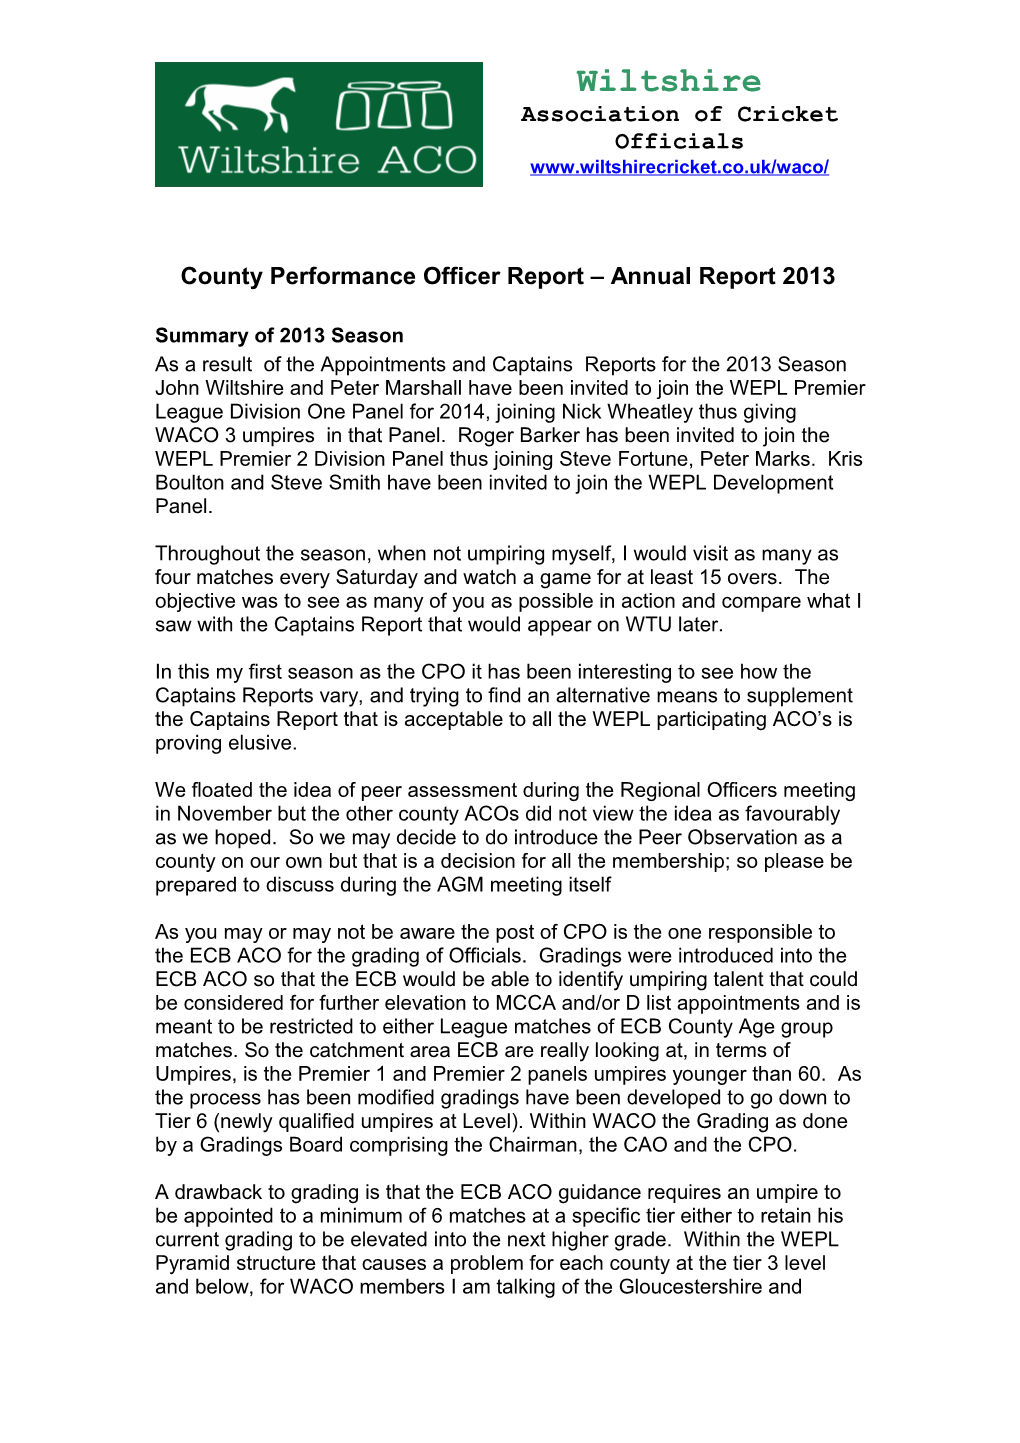 County Performance Officer Report Annual Report 2013